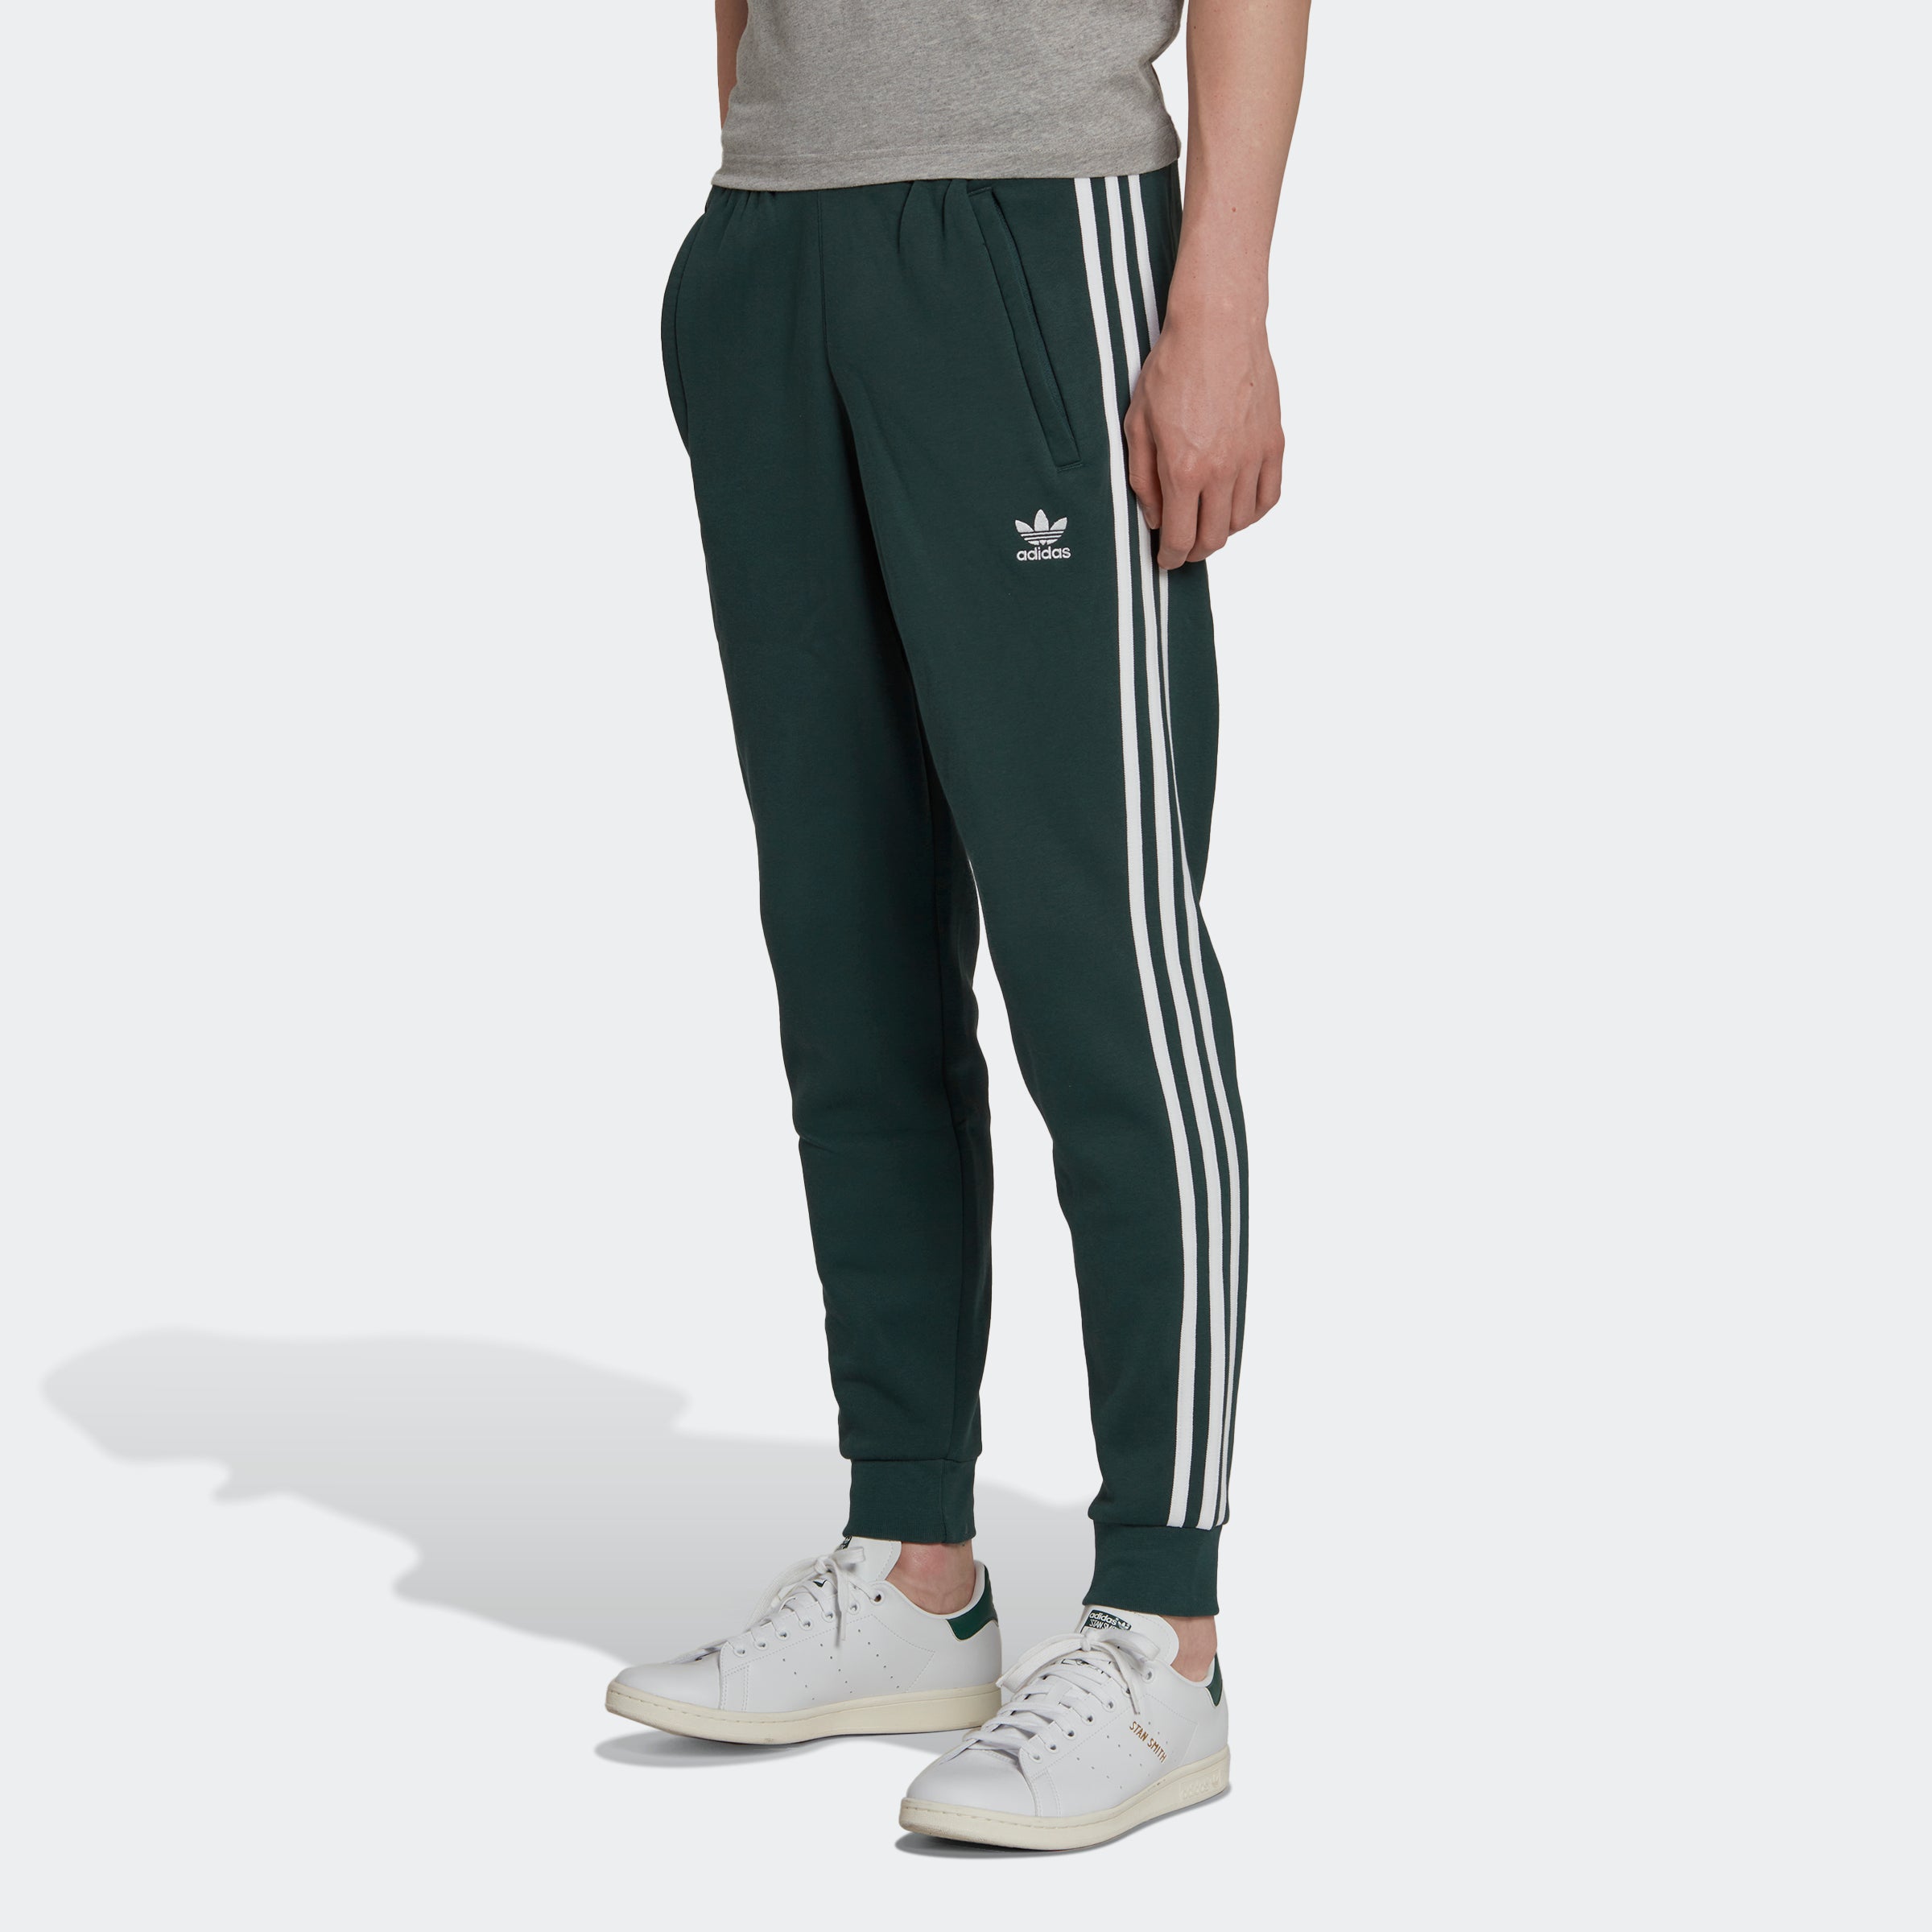 Chicago | adidas Adicolor Pants Sports Green 3-Stripes City Mineral